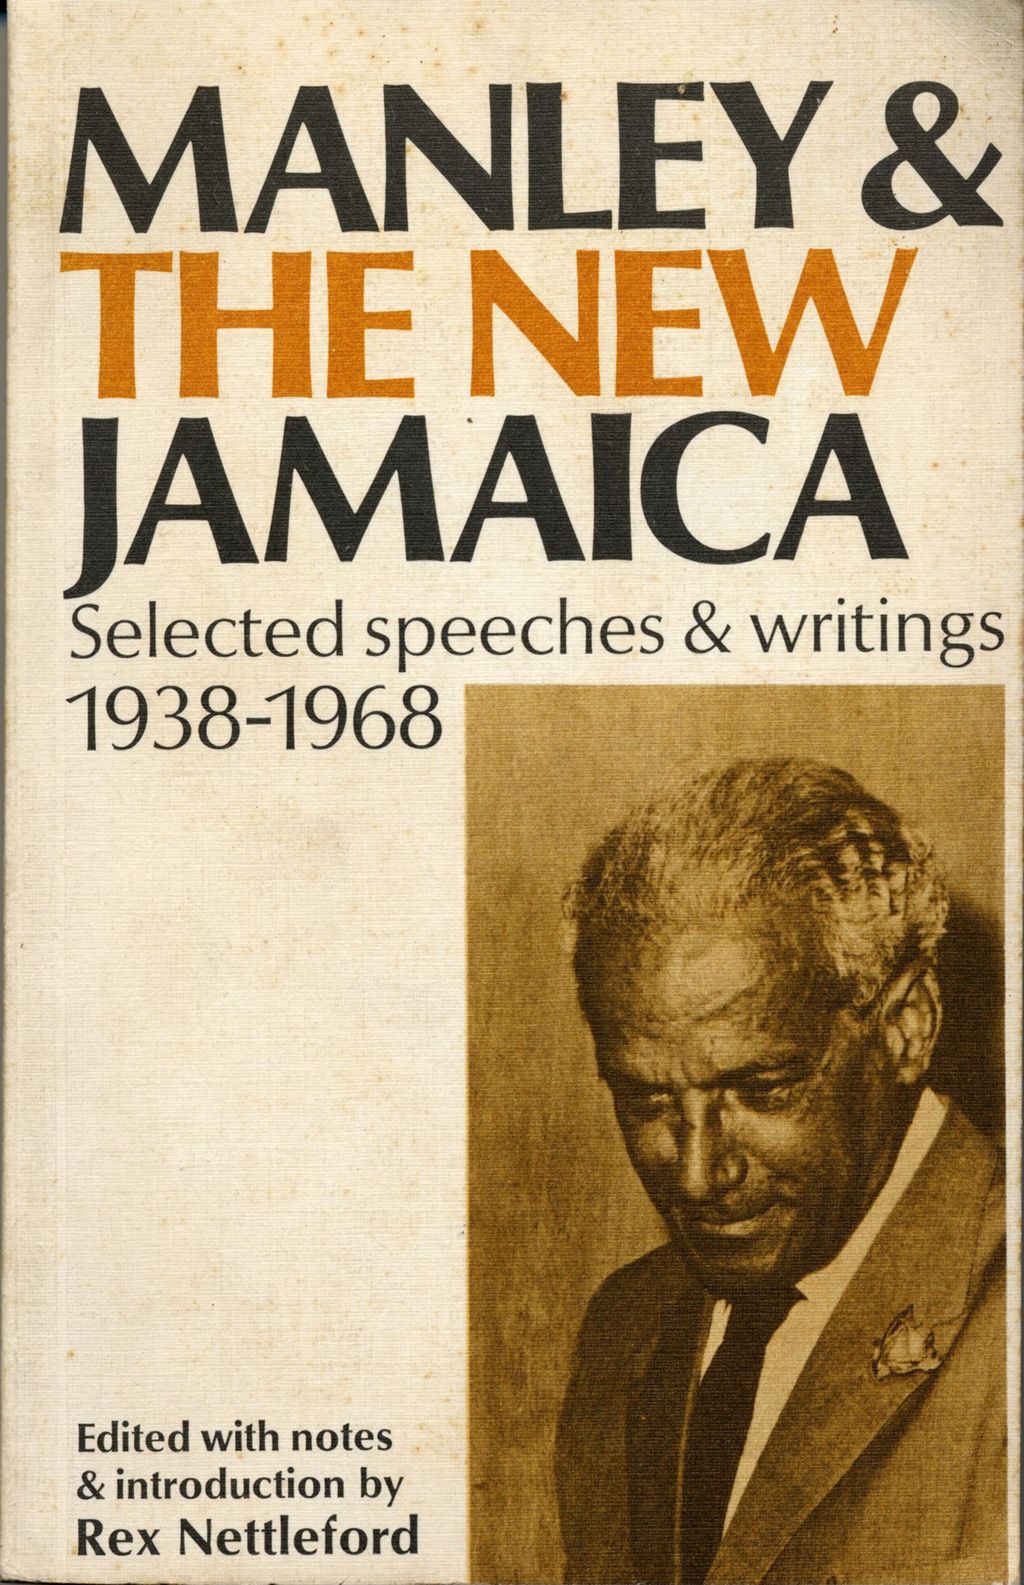 Norman Washington Manley and the new Jamaica: selected speeches and writings, 1938-68 (paperback edition)